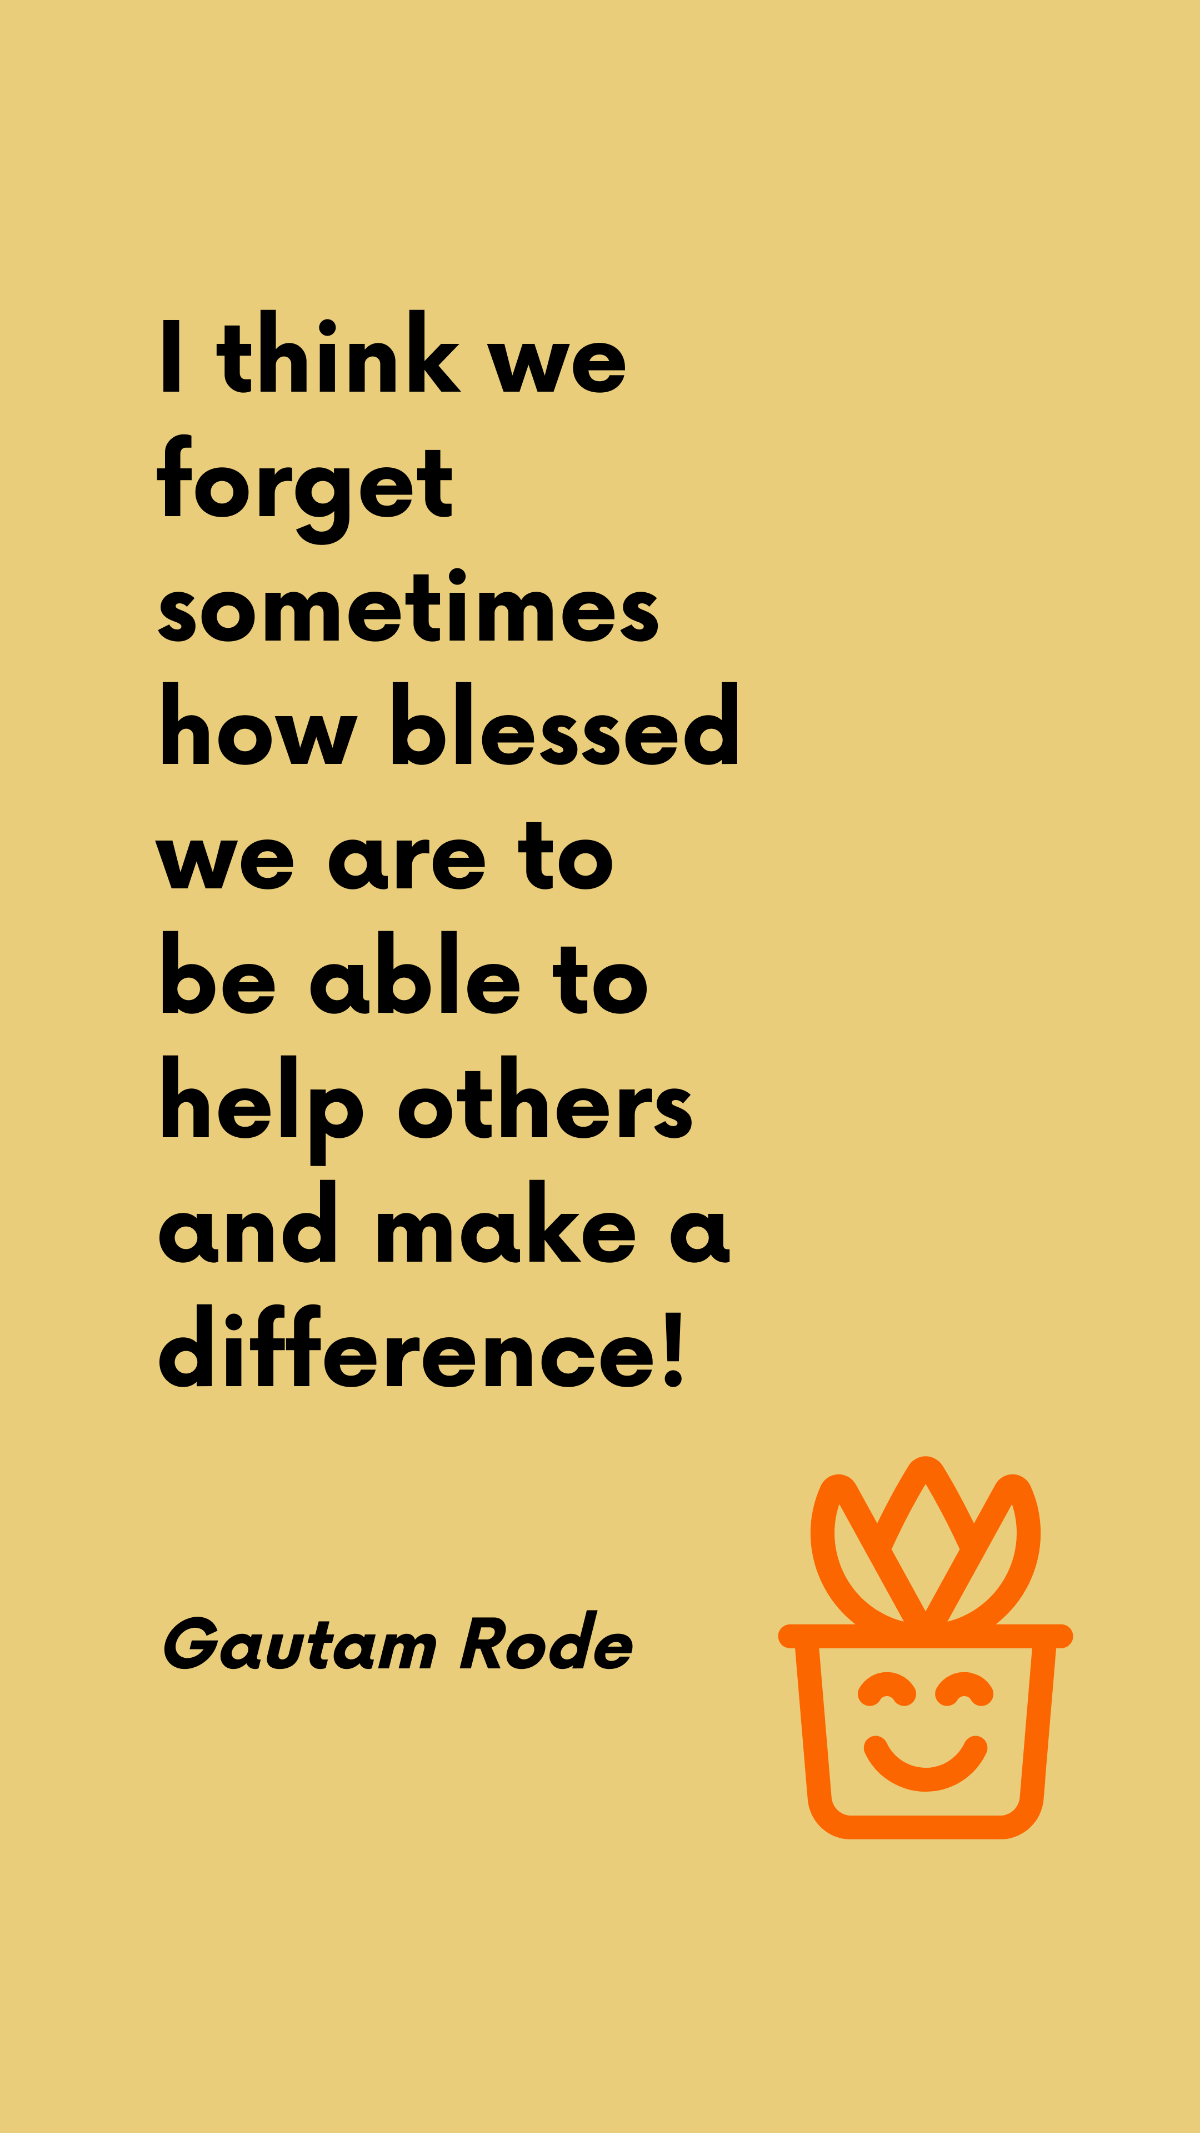 Free Gautam Rode - I think we forget sometimes how blessed we are to be able to help others and make a difference! Template